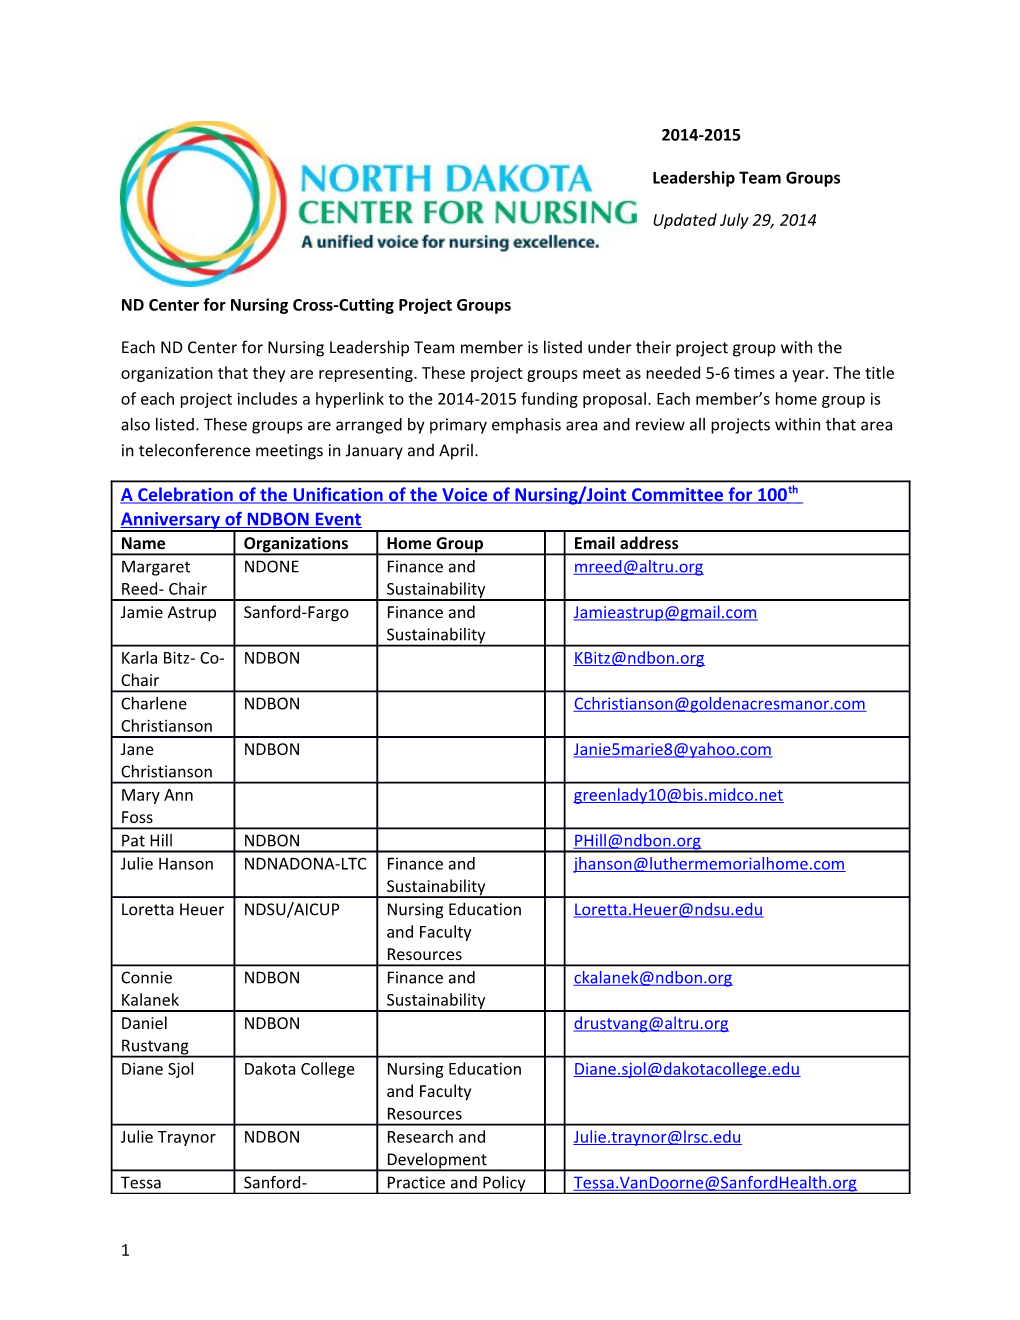 ND Center for Nursing Cross-Cutting Project Groups